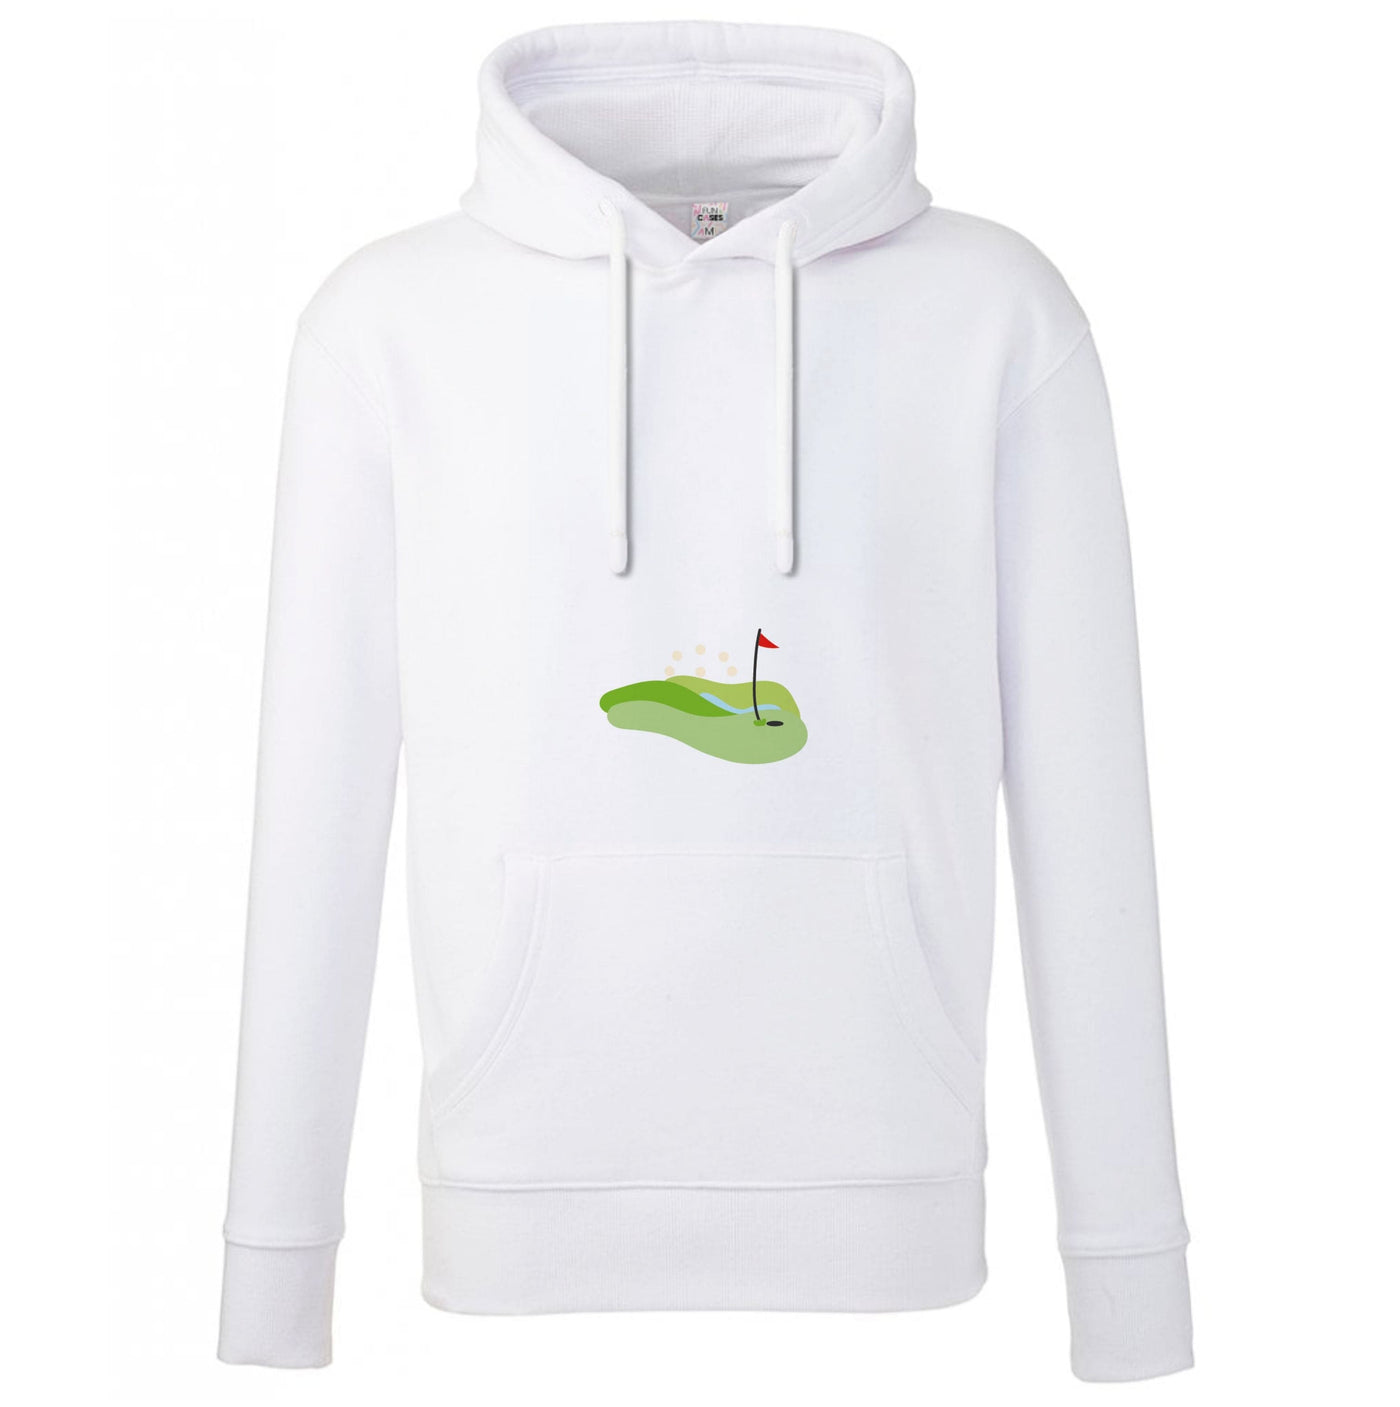 Golf course Hoodie